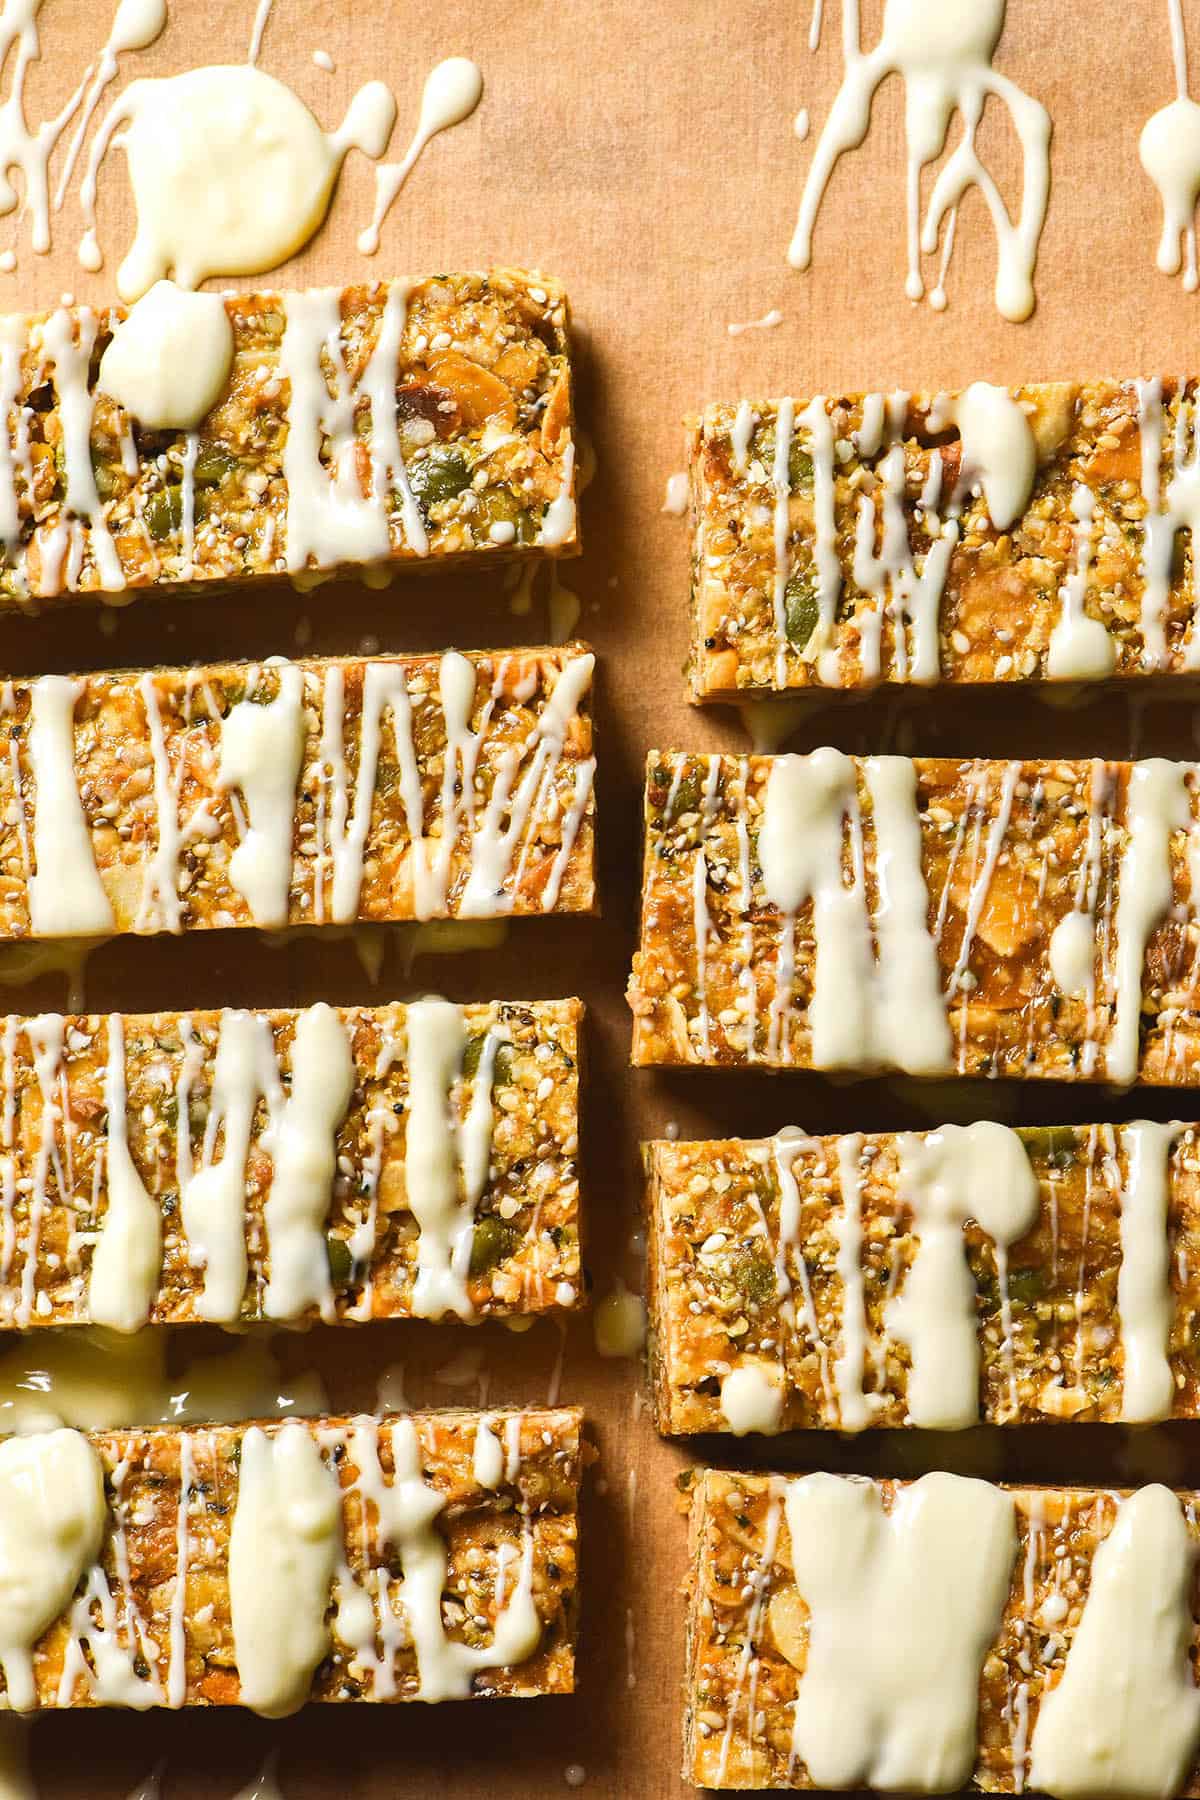 An aerial image of gluten free granola bars on a sheet of brown baking paper being drizzled with white chocolate